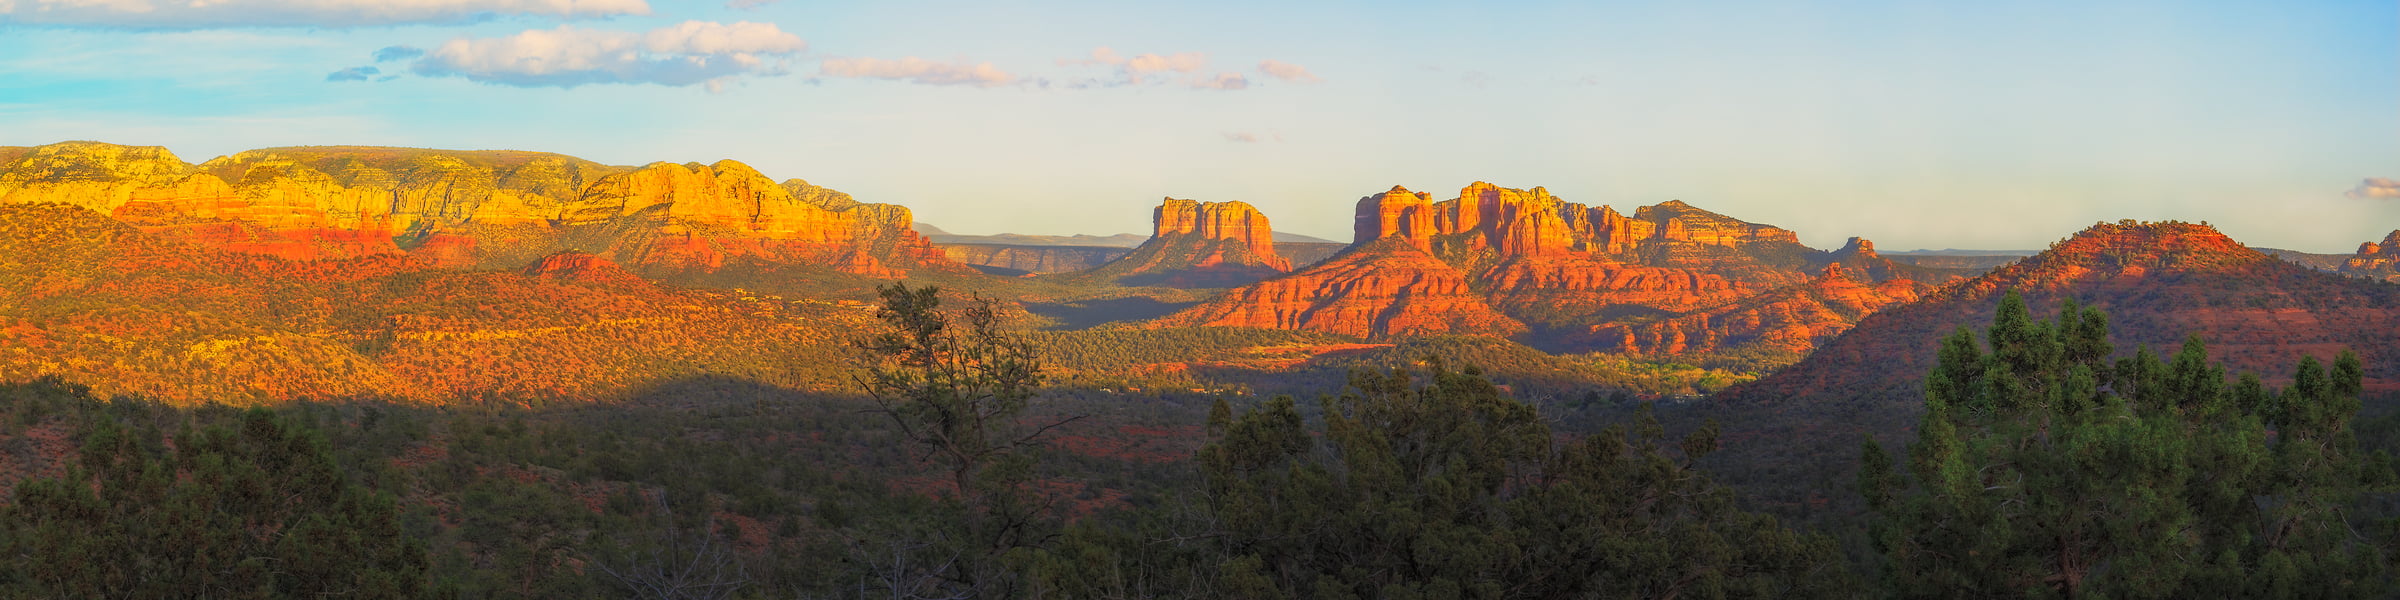 1,435 megapixels! A very high resolution, large-format VAST photo print of a scenic landscape in Sedona, Arizona; photograph created by John Freeman.